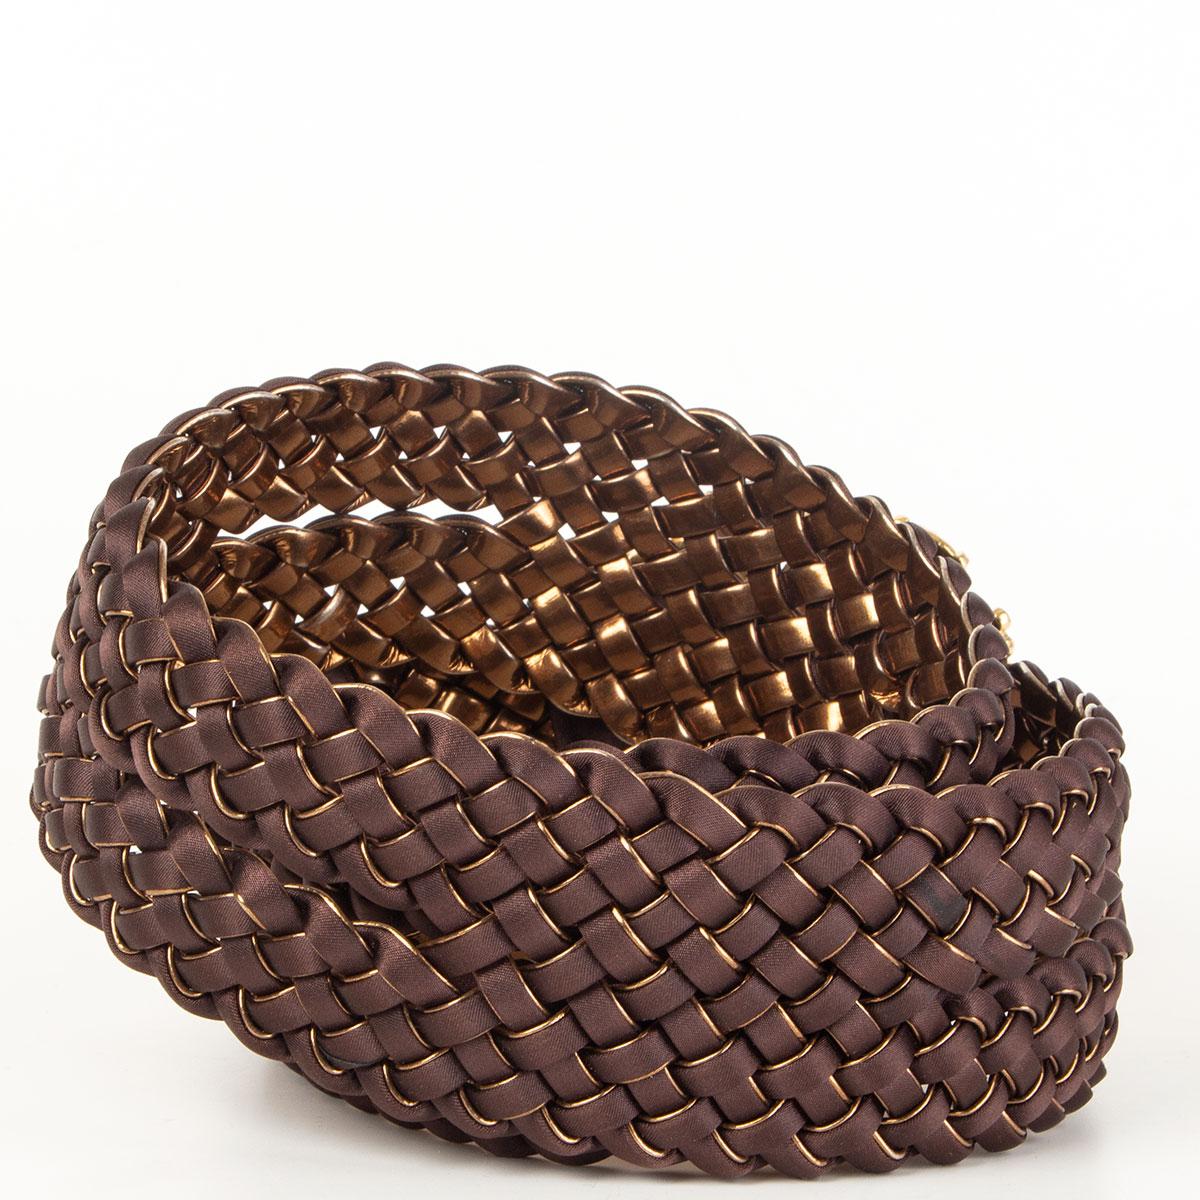 Roberto Cavalli braided belt in brown viscose and antique gold-tone leather on the back side. Embellished wooden buckle featuring gold-tone metal hardware. Has been worn and is in excellent condition.

Width 6cm (2.3in)
Length up to 103cm